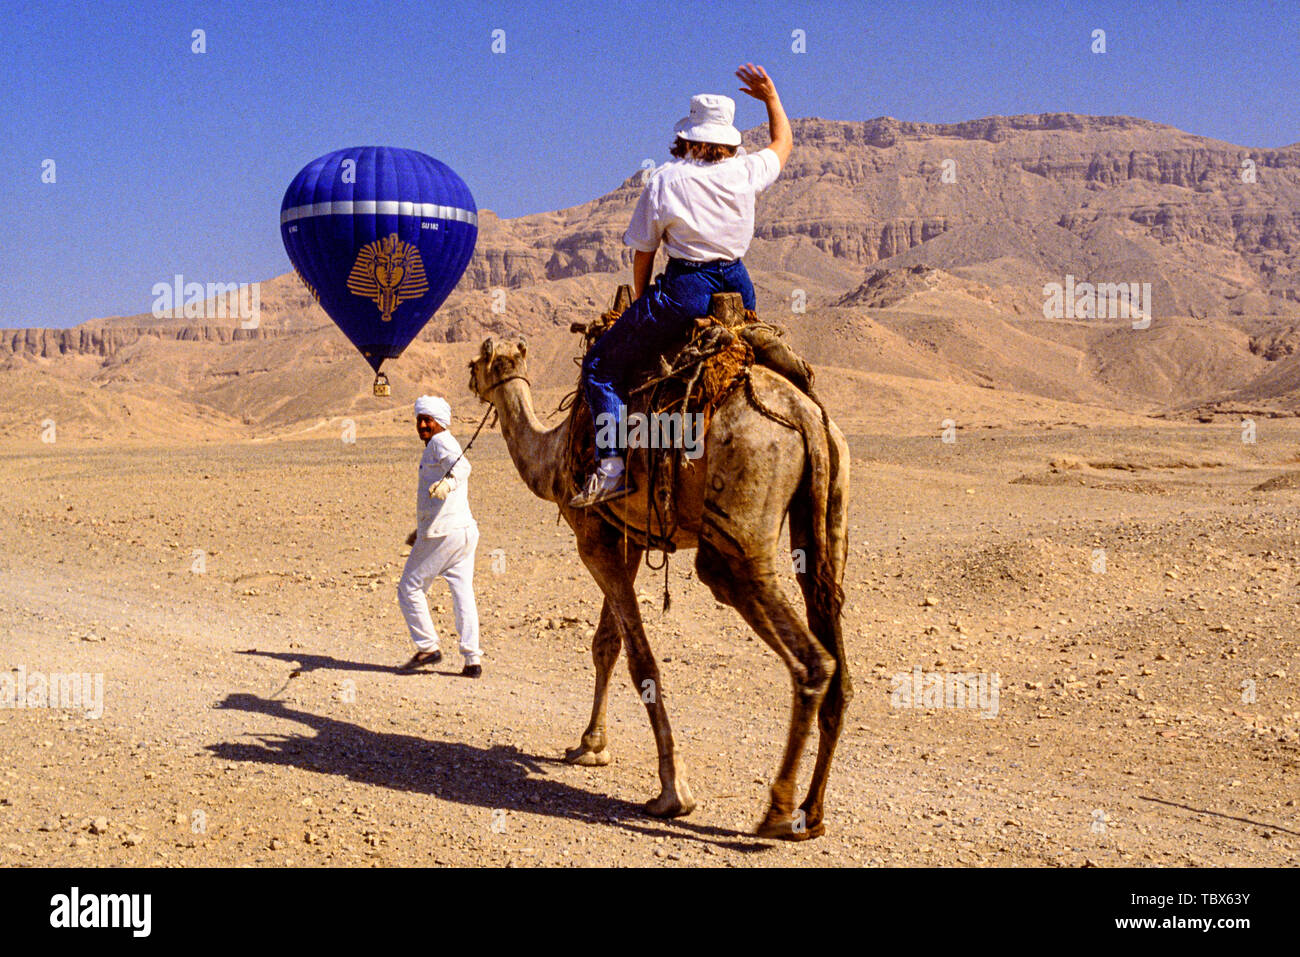 Photo: © Simon Grosset. Hot air ballooning over the Valley of the Kings, Luxor, Egypt. A tourist follows the balloon on camelback. Archive: Image digi Stock Photo